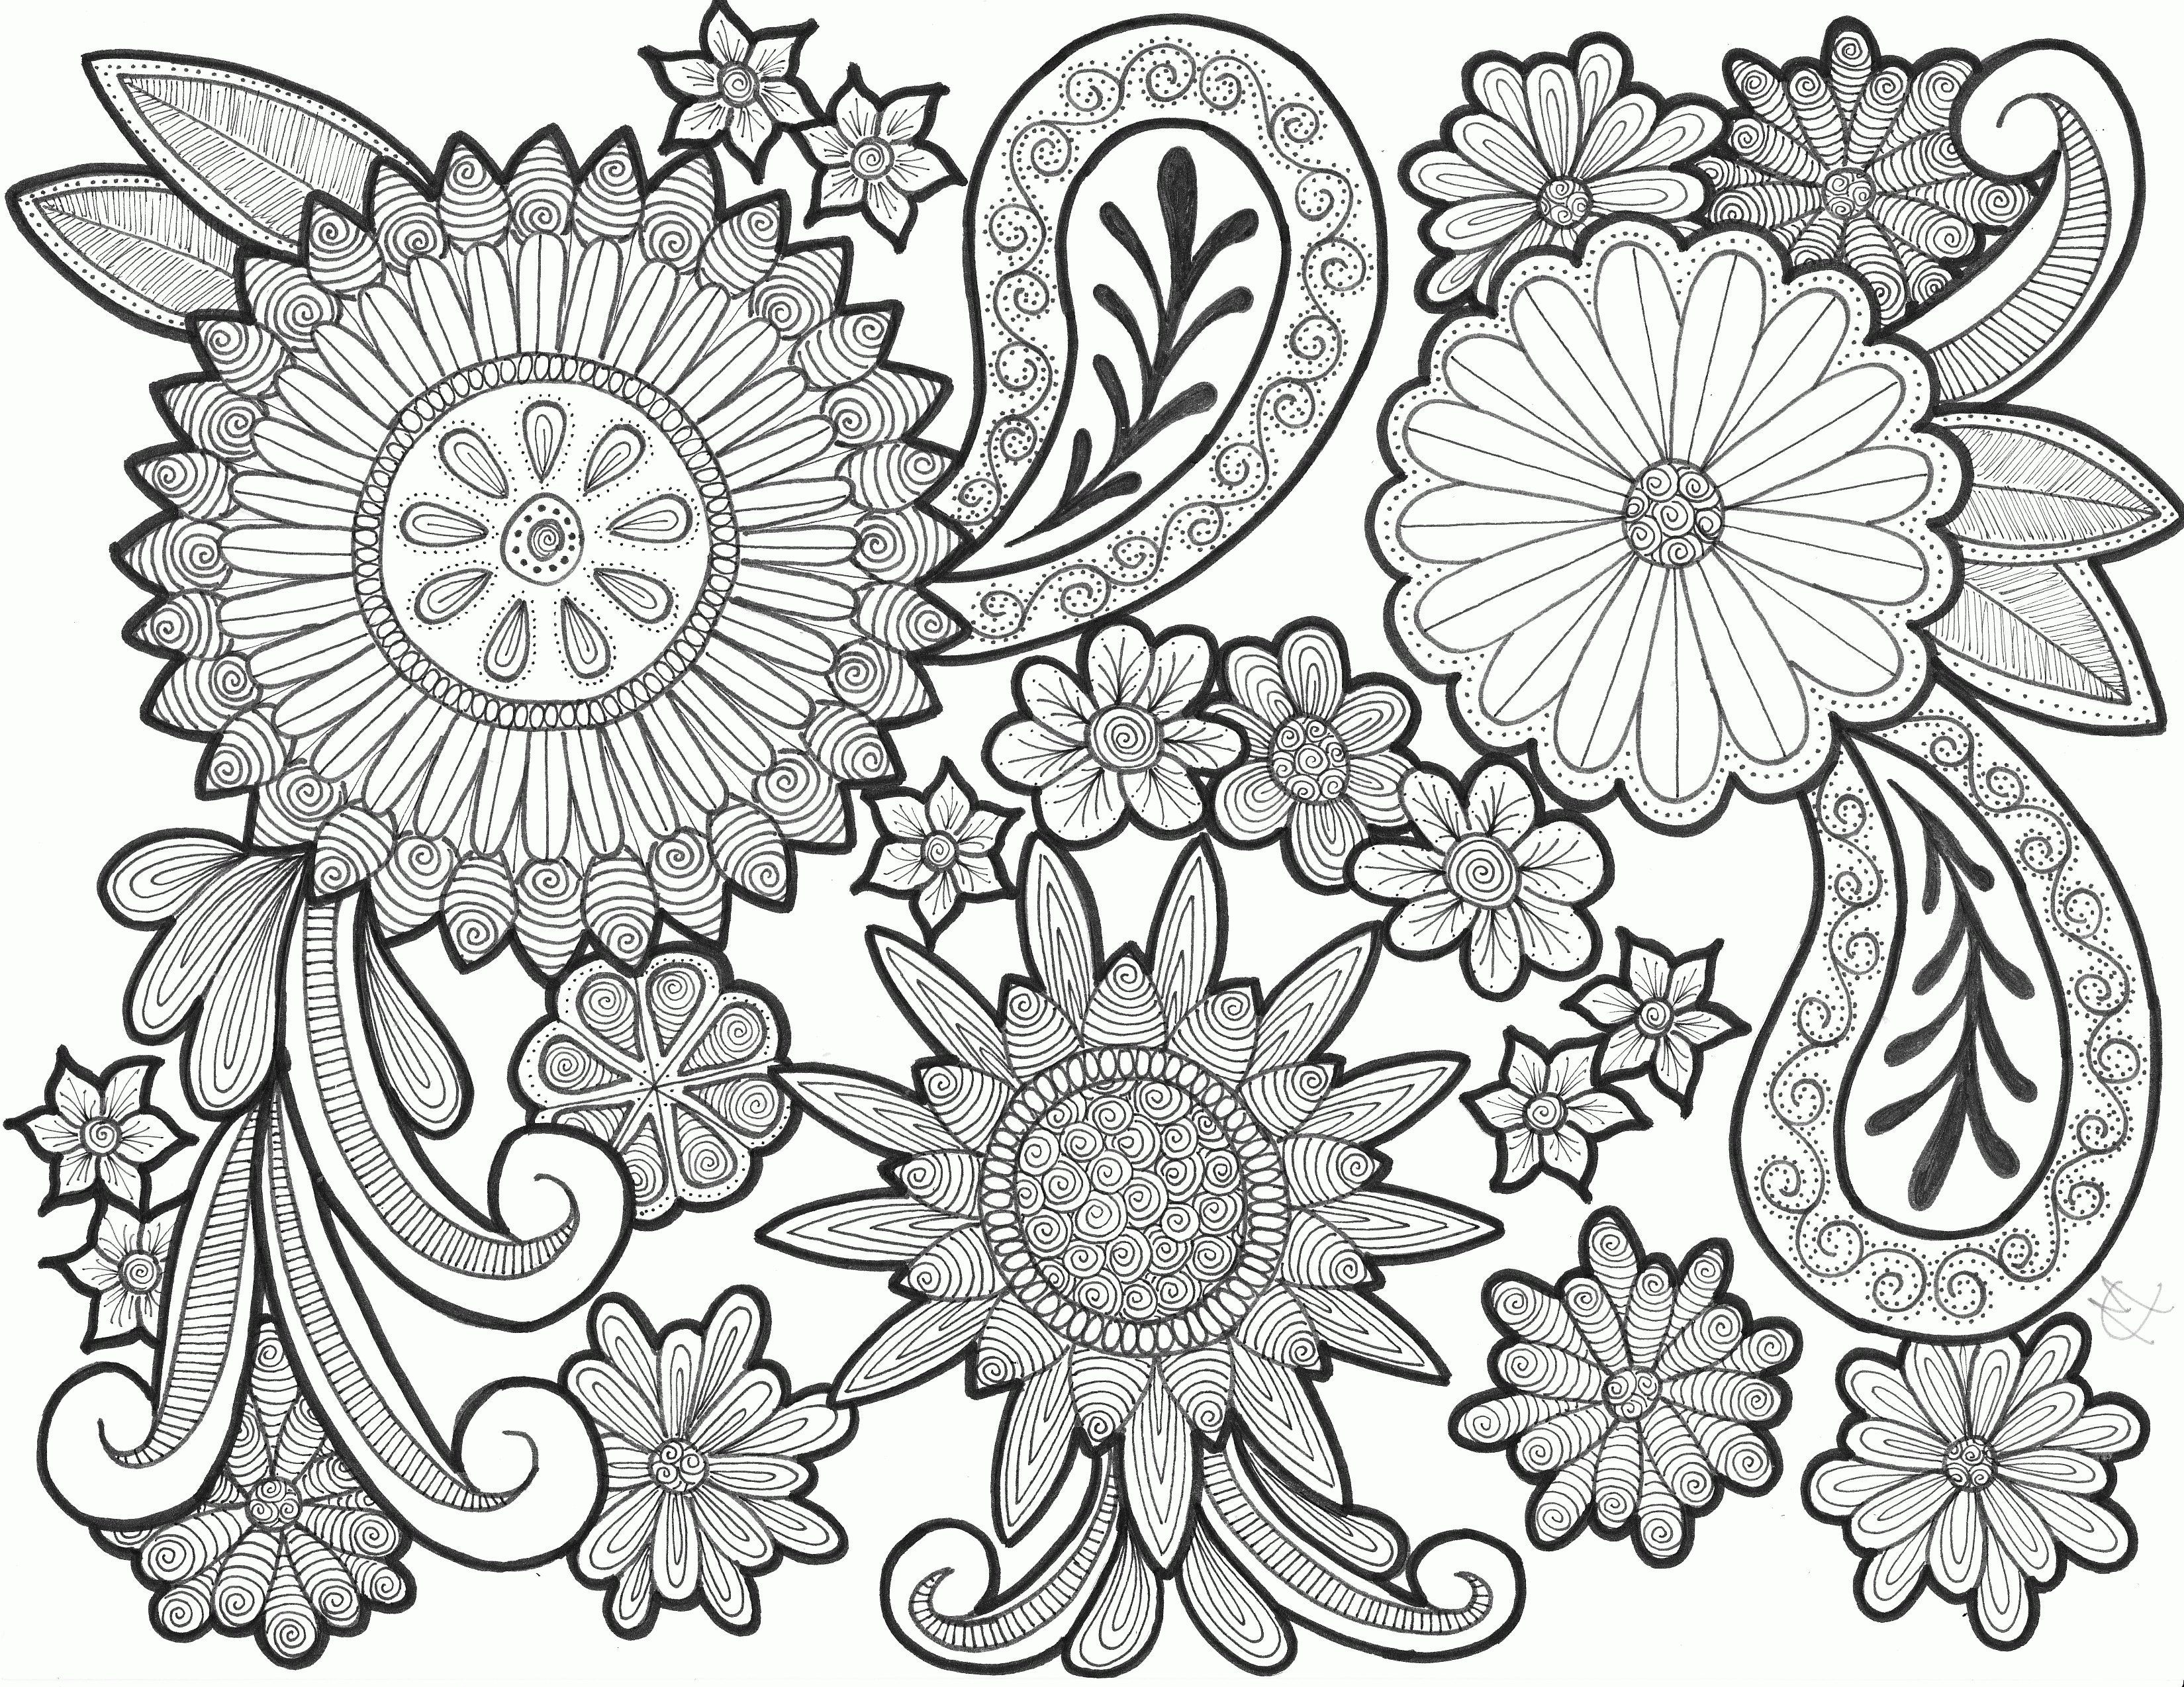 Coloring Pages For Adults Printable Paisley / Paisley Coloring Page